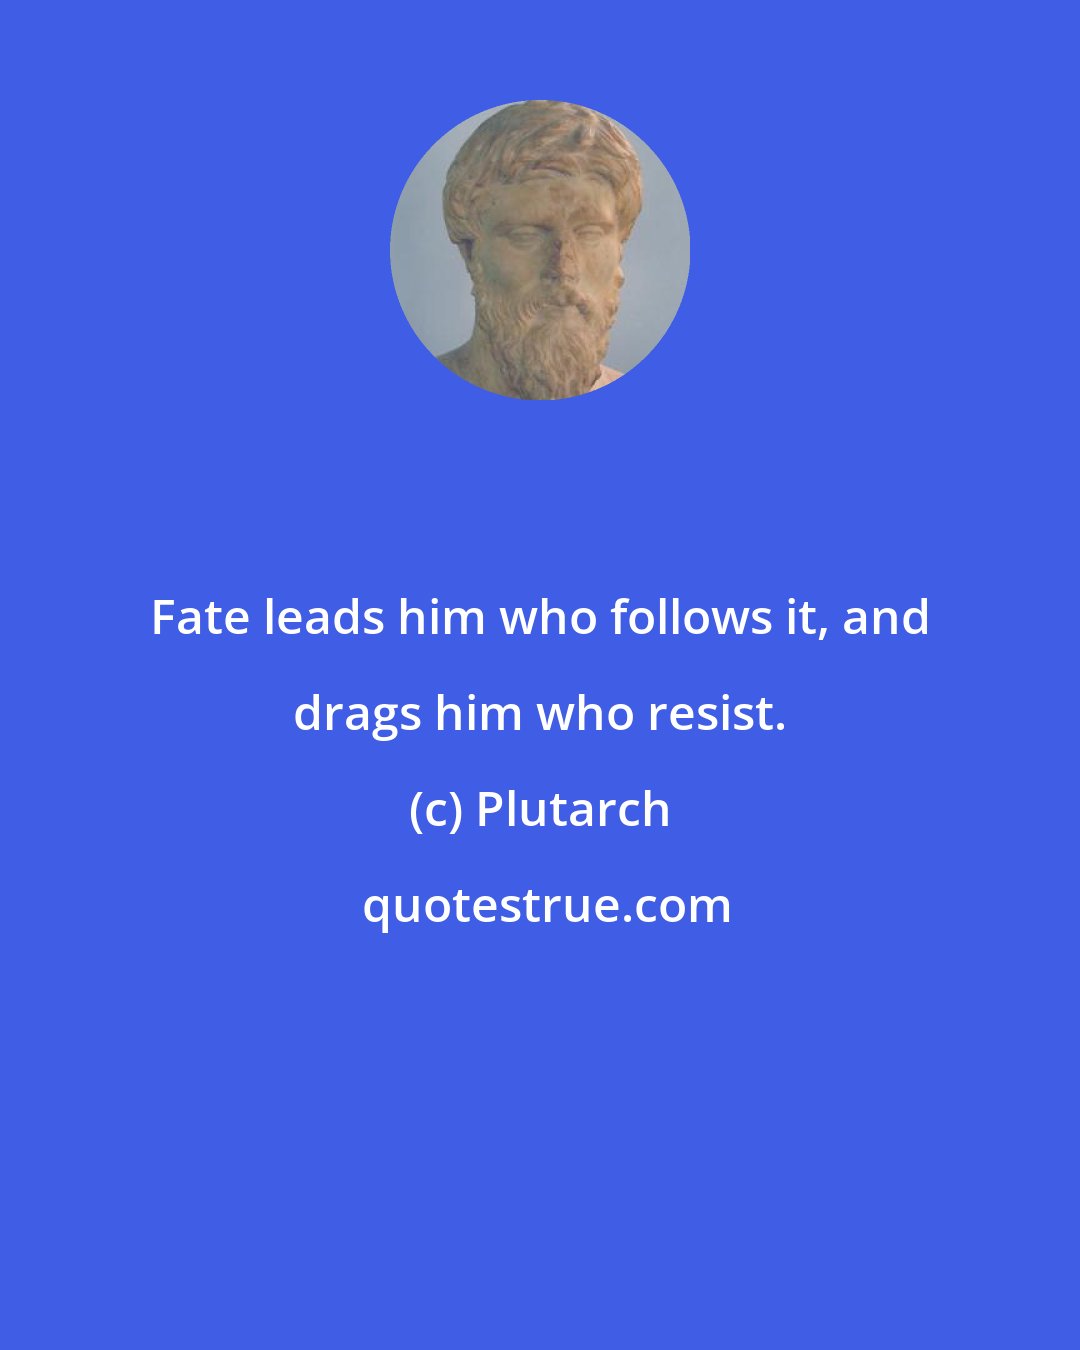 Plutarch: Fate leads him who follows it, and drags him who resist.